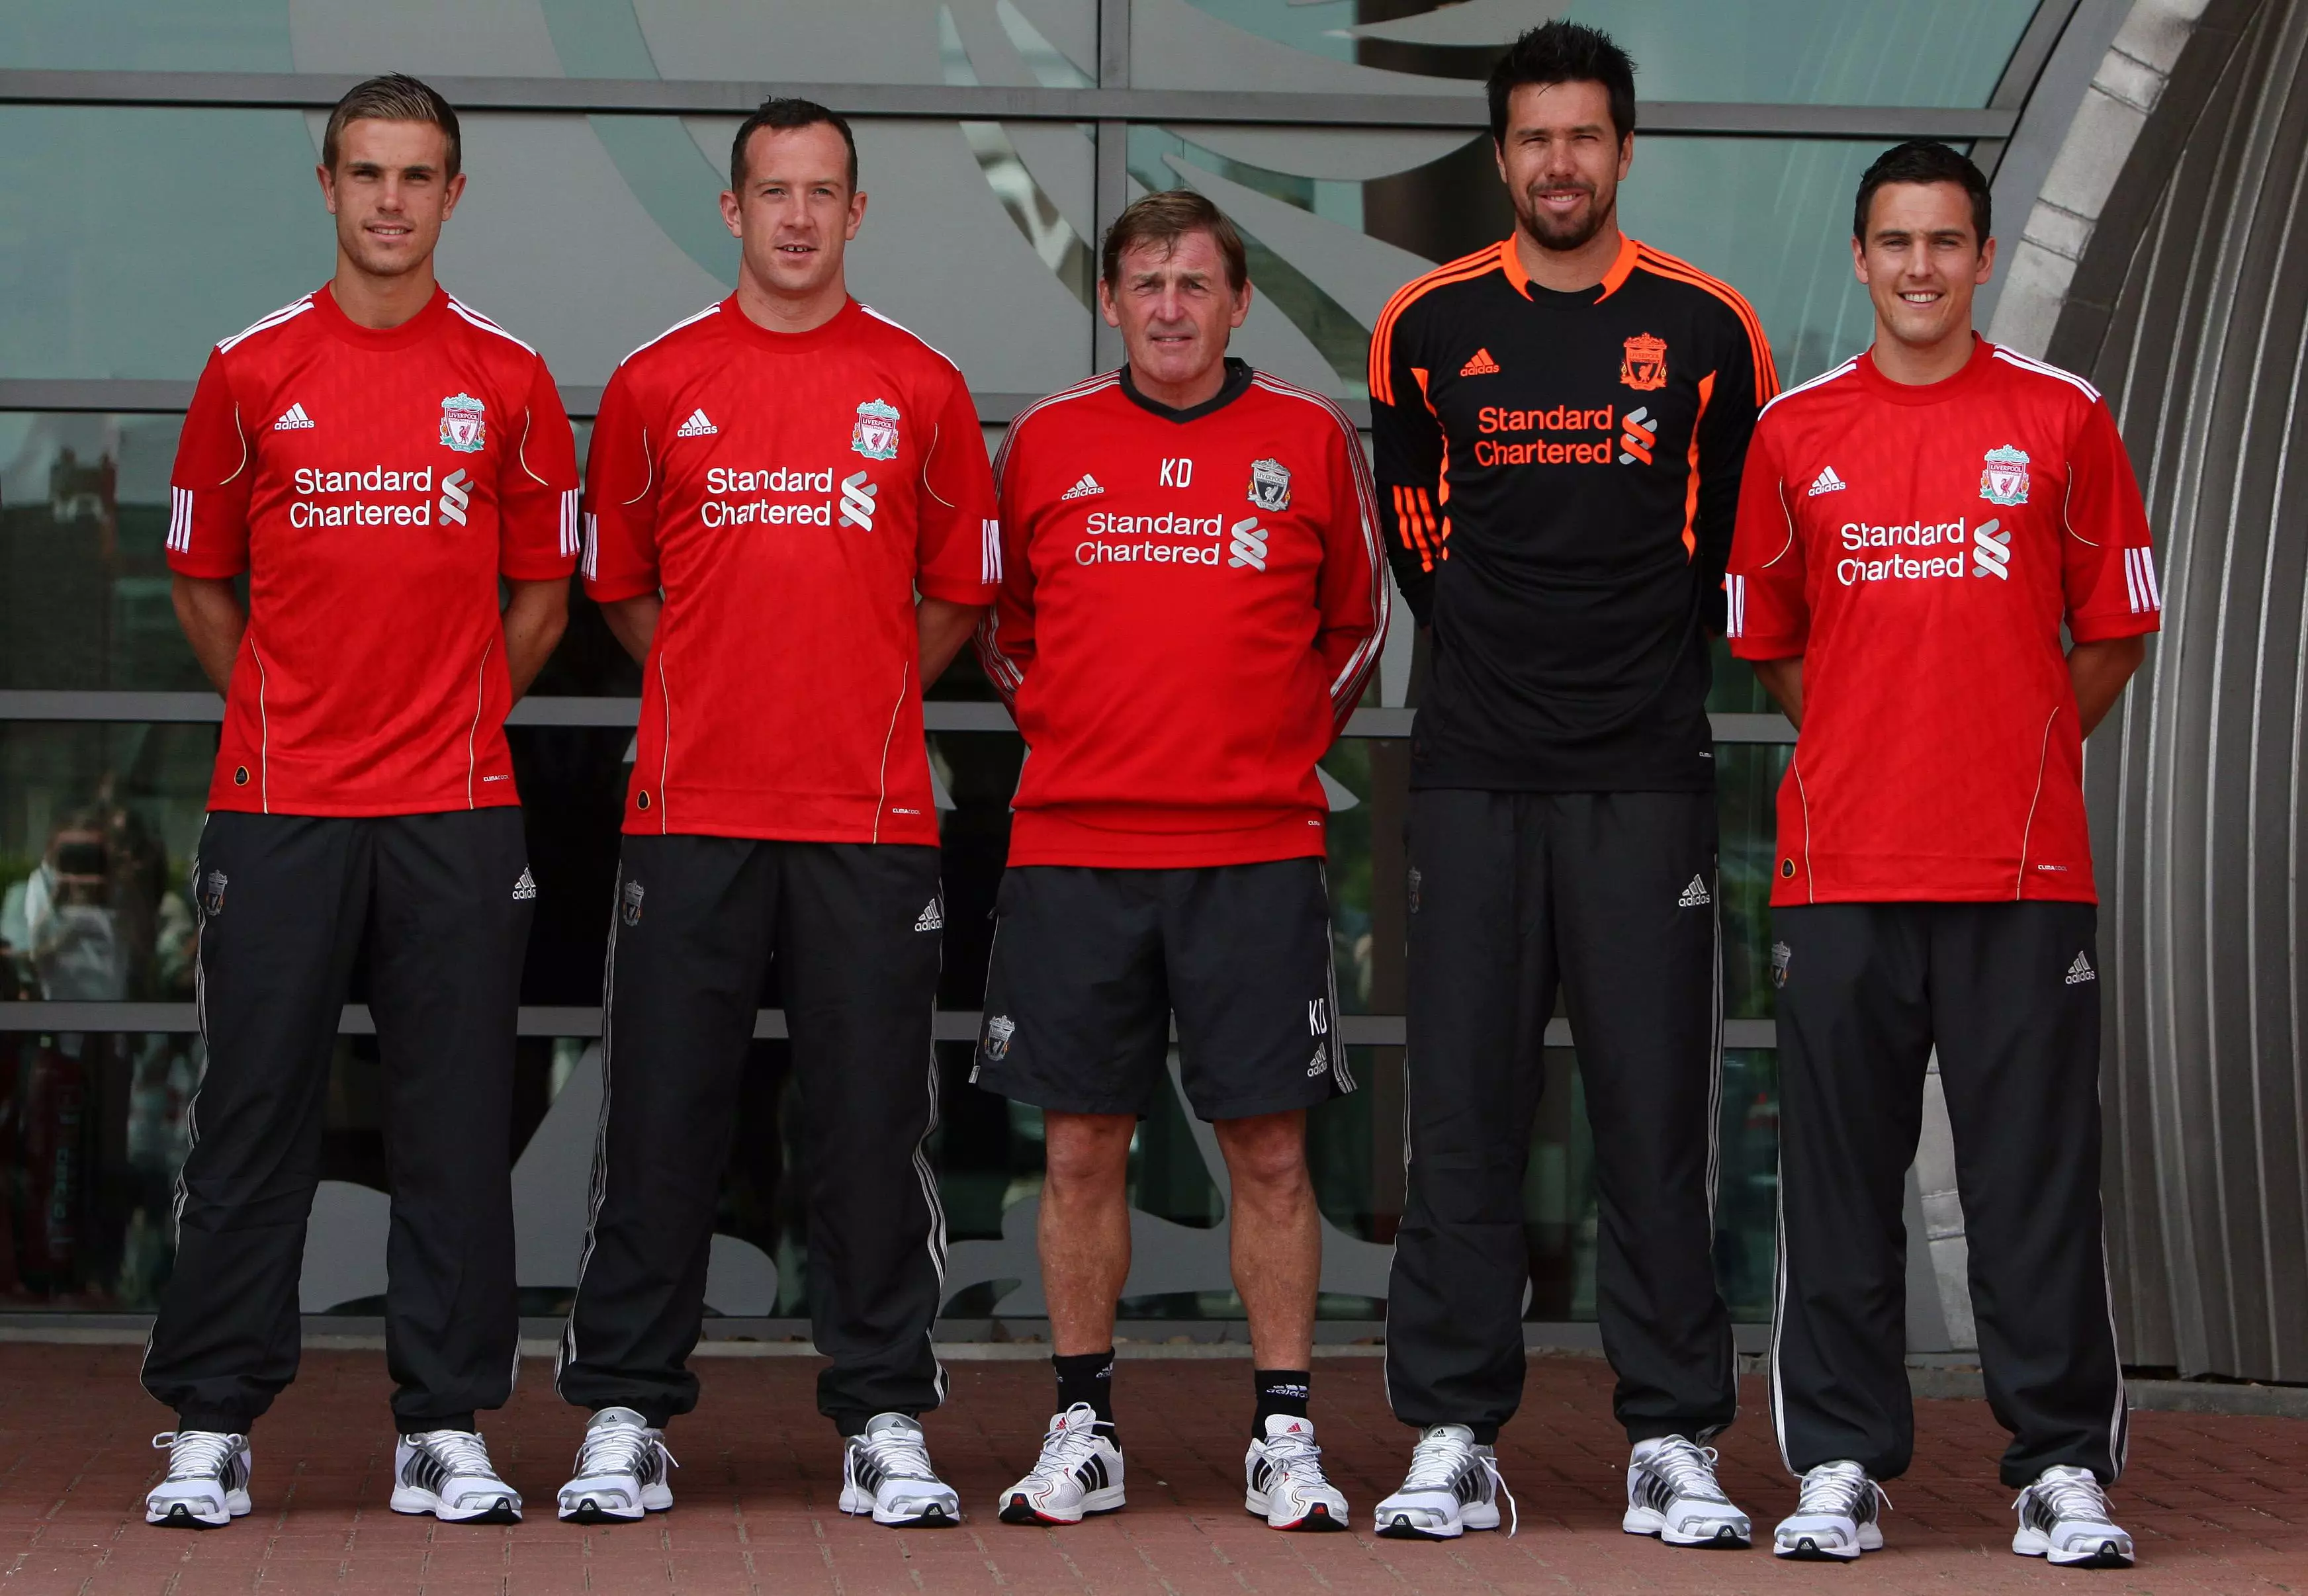 A young Henderson (Far left) poses after signing in 2011. (Image